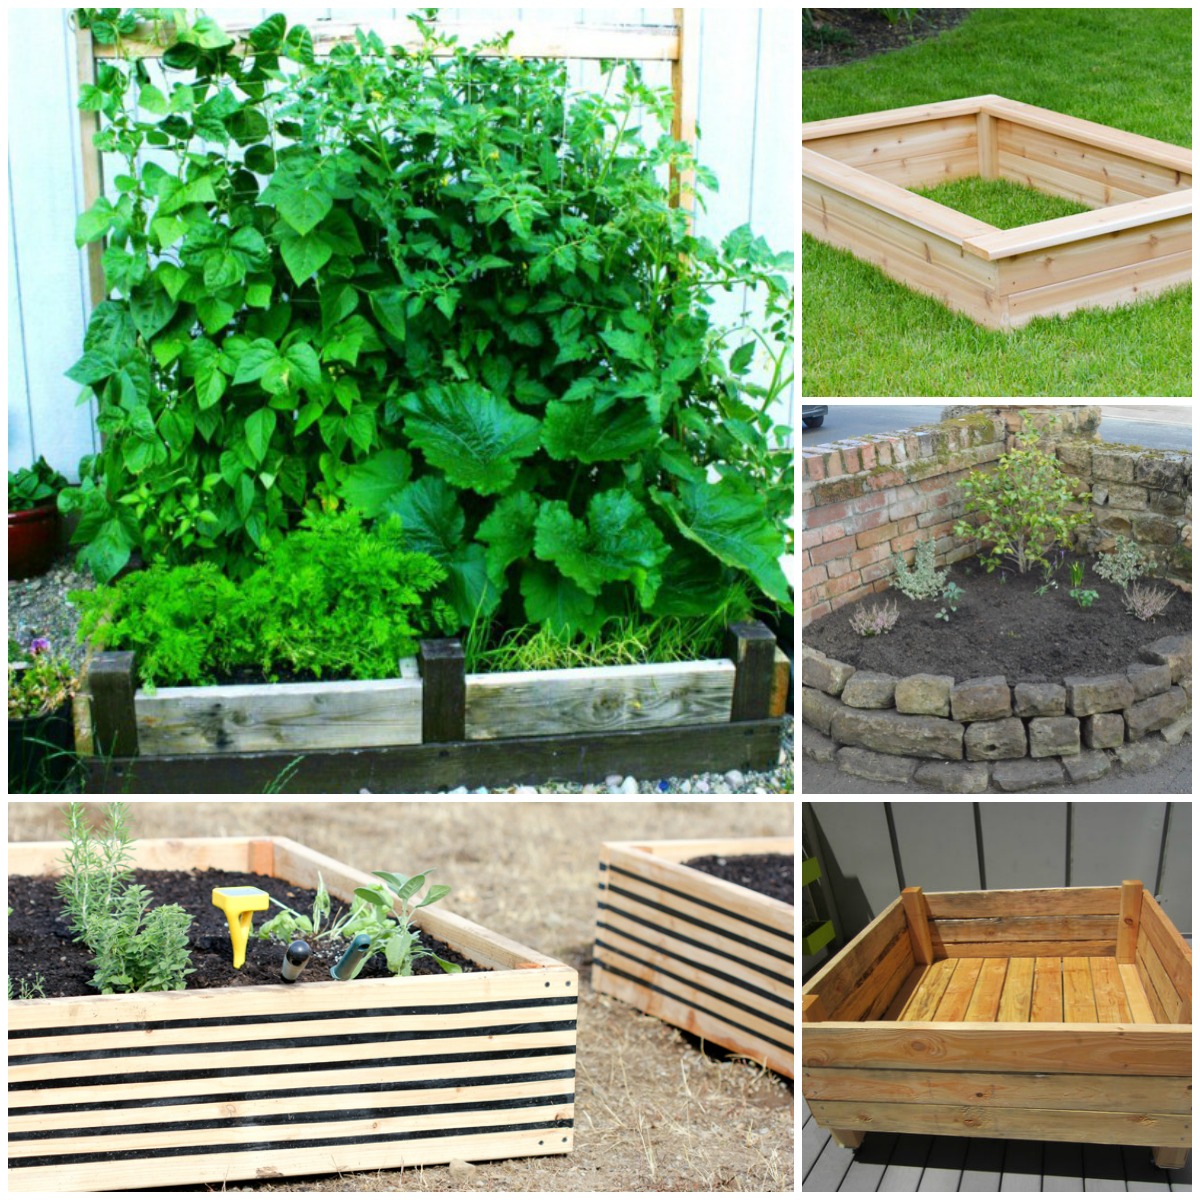 these raised garden bed ideas are so easy and clever, i want DDWWHHB